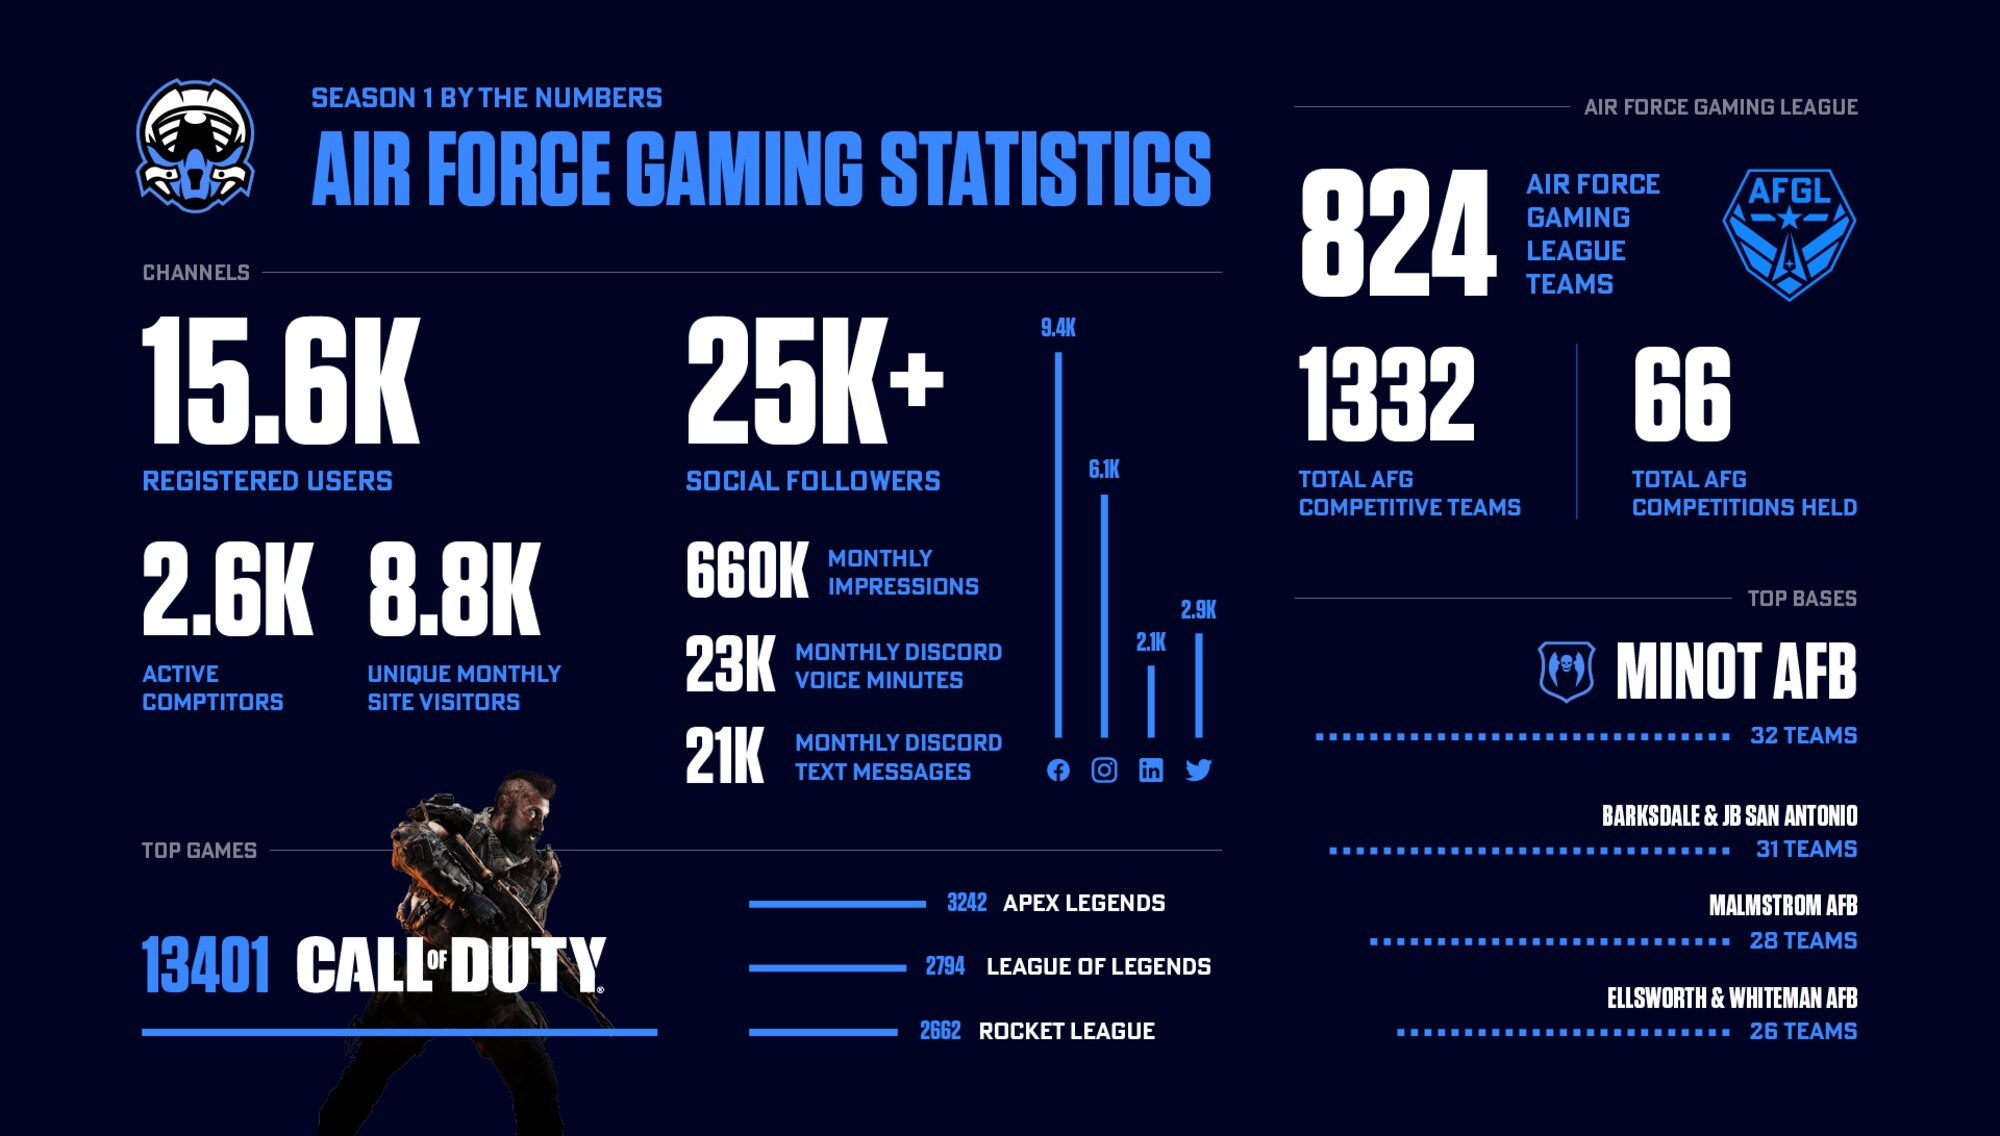 Statistics for Department of the Air Force Gaming season one.